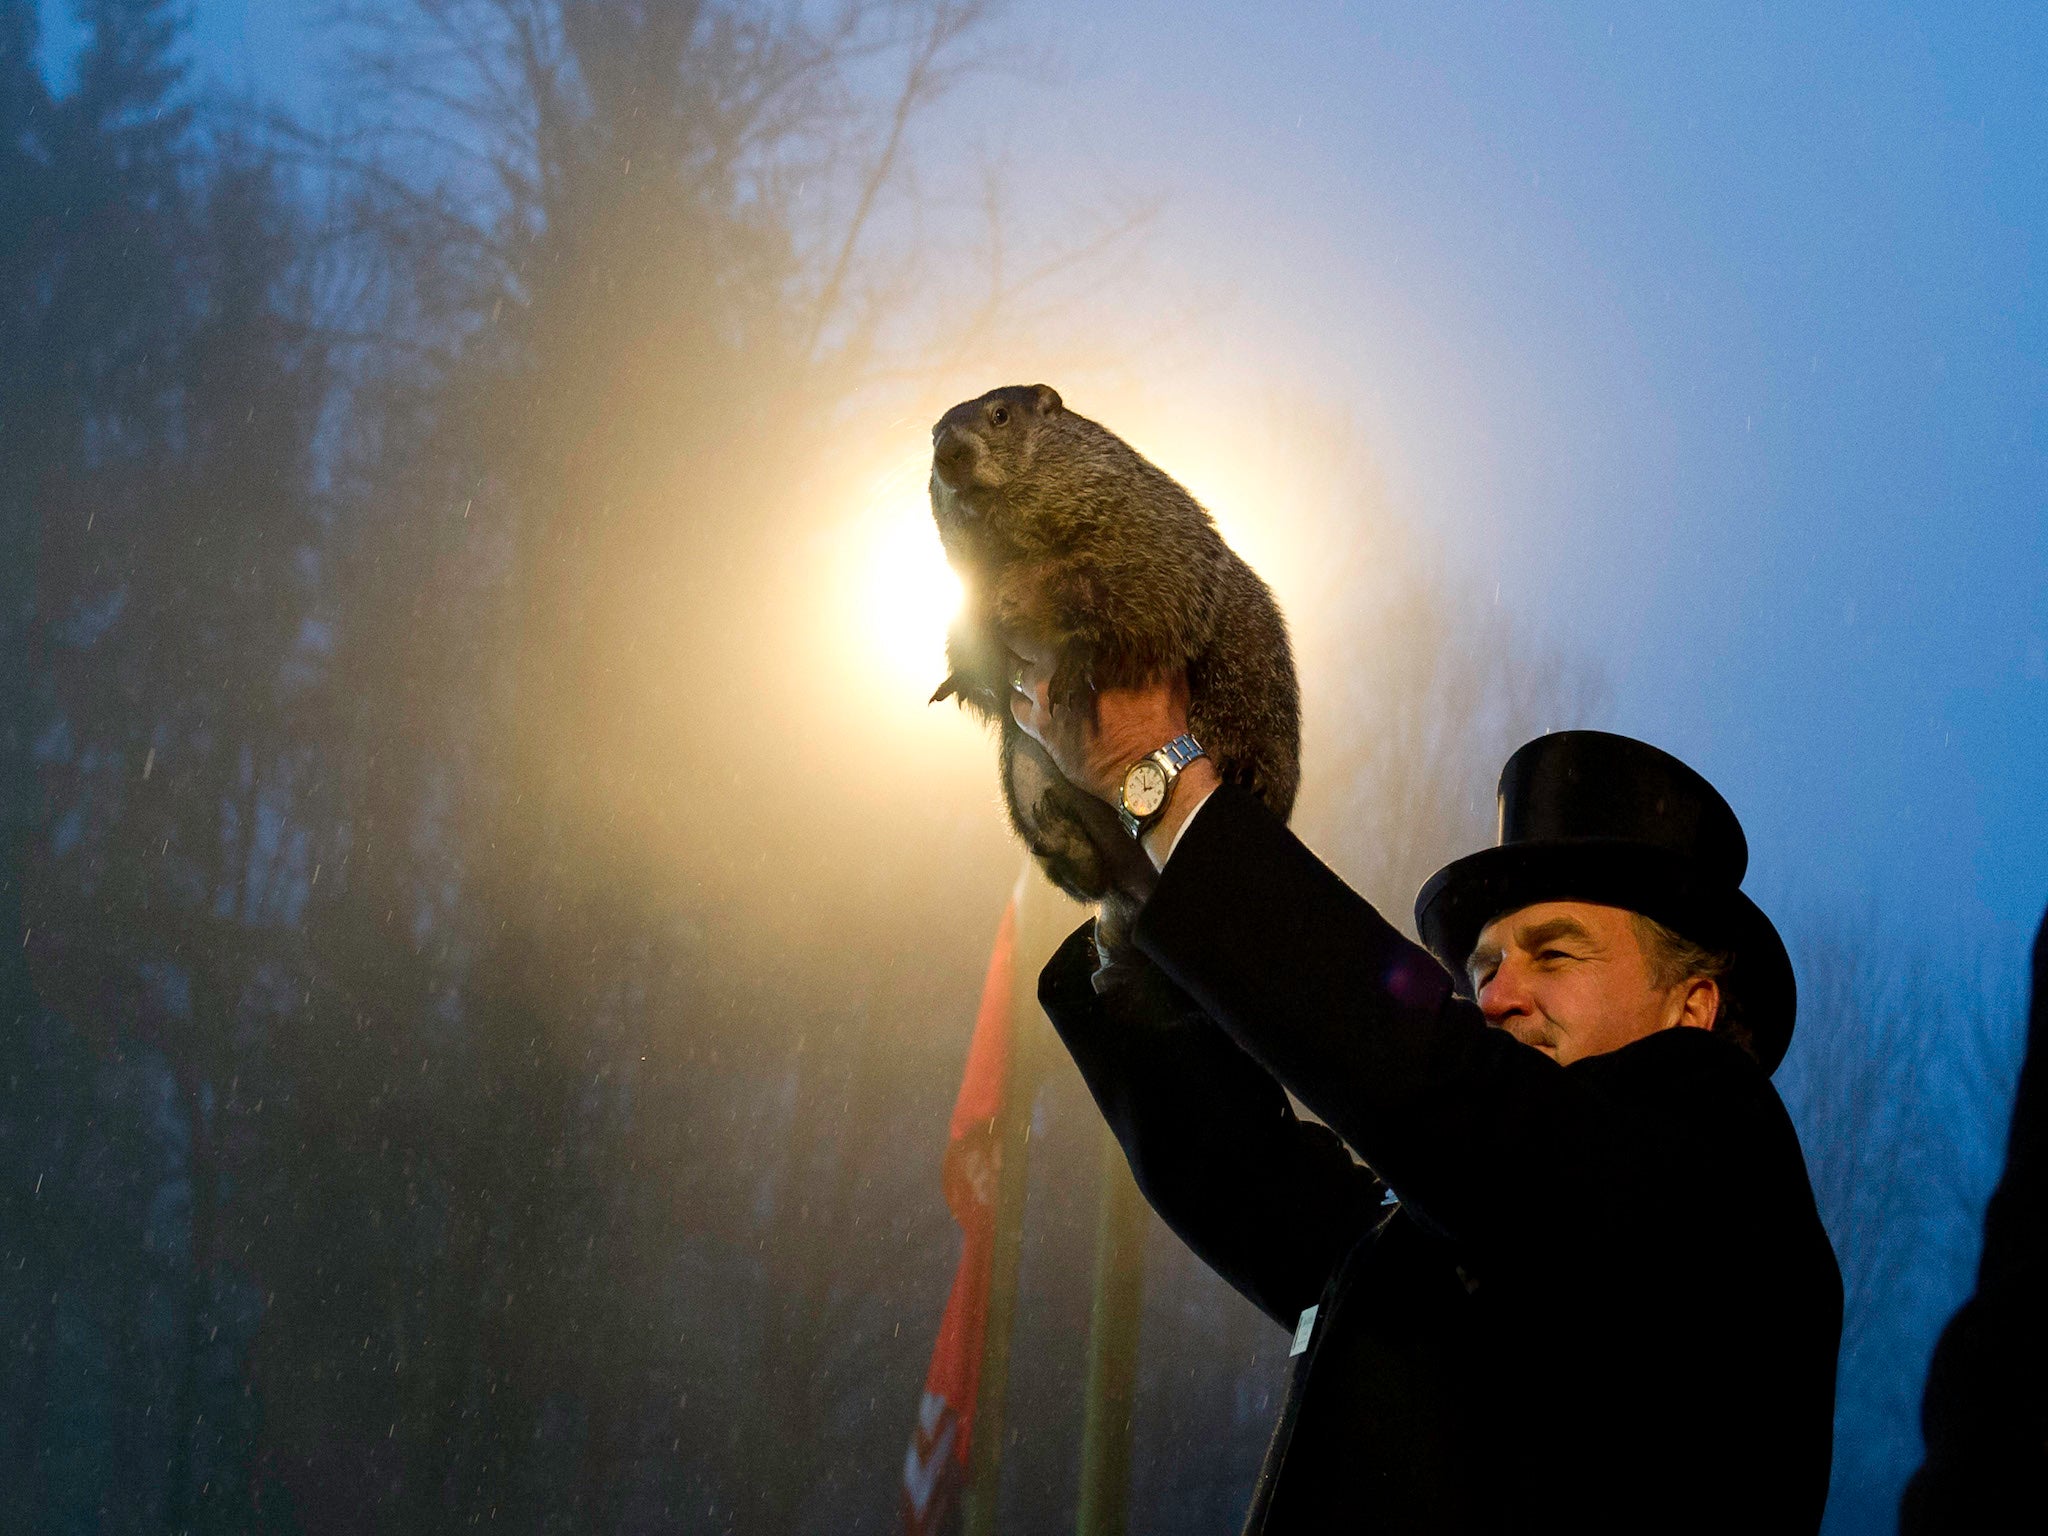 The tradition of Punxsutawney Phil has its roots in German tradition